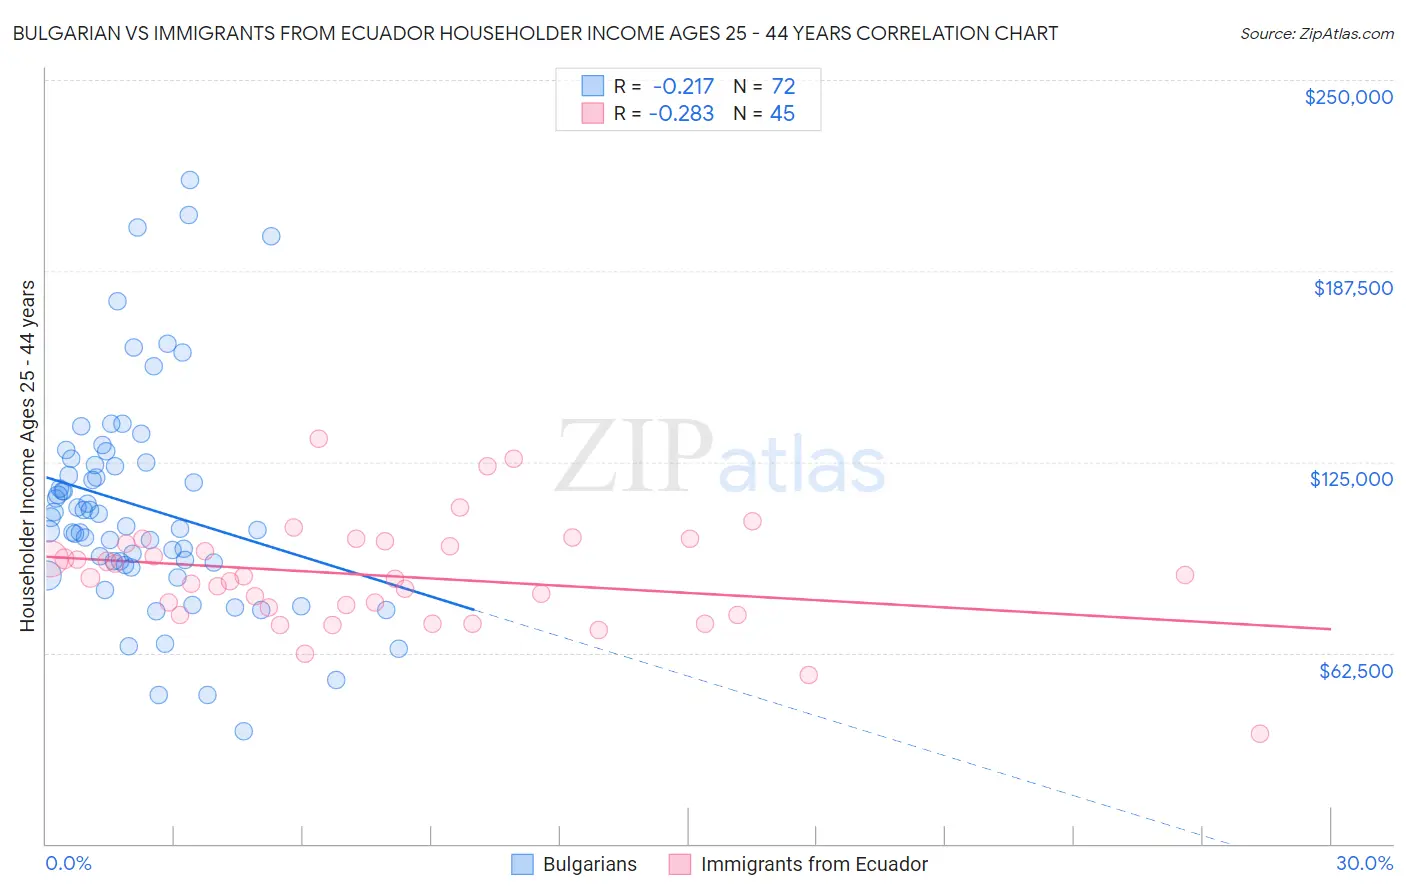 Bulgarian vs Immigrants from Ecuador Householder Income Ages 25 - 44 years